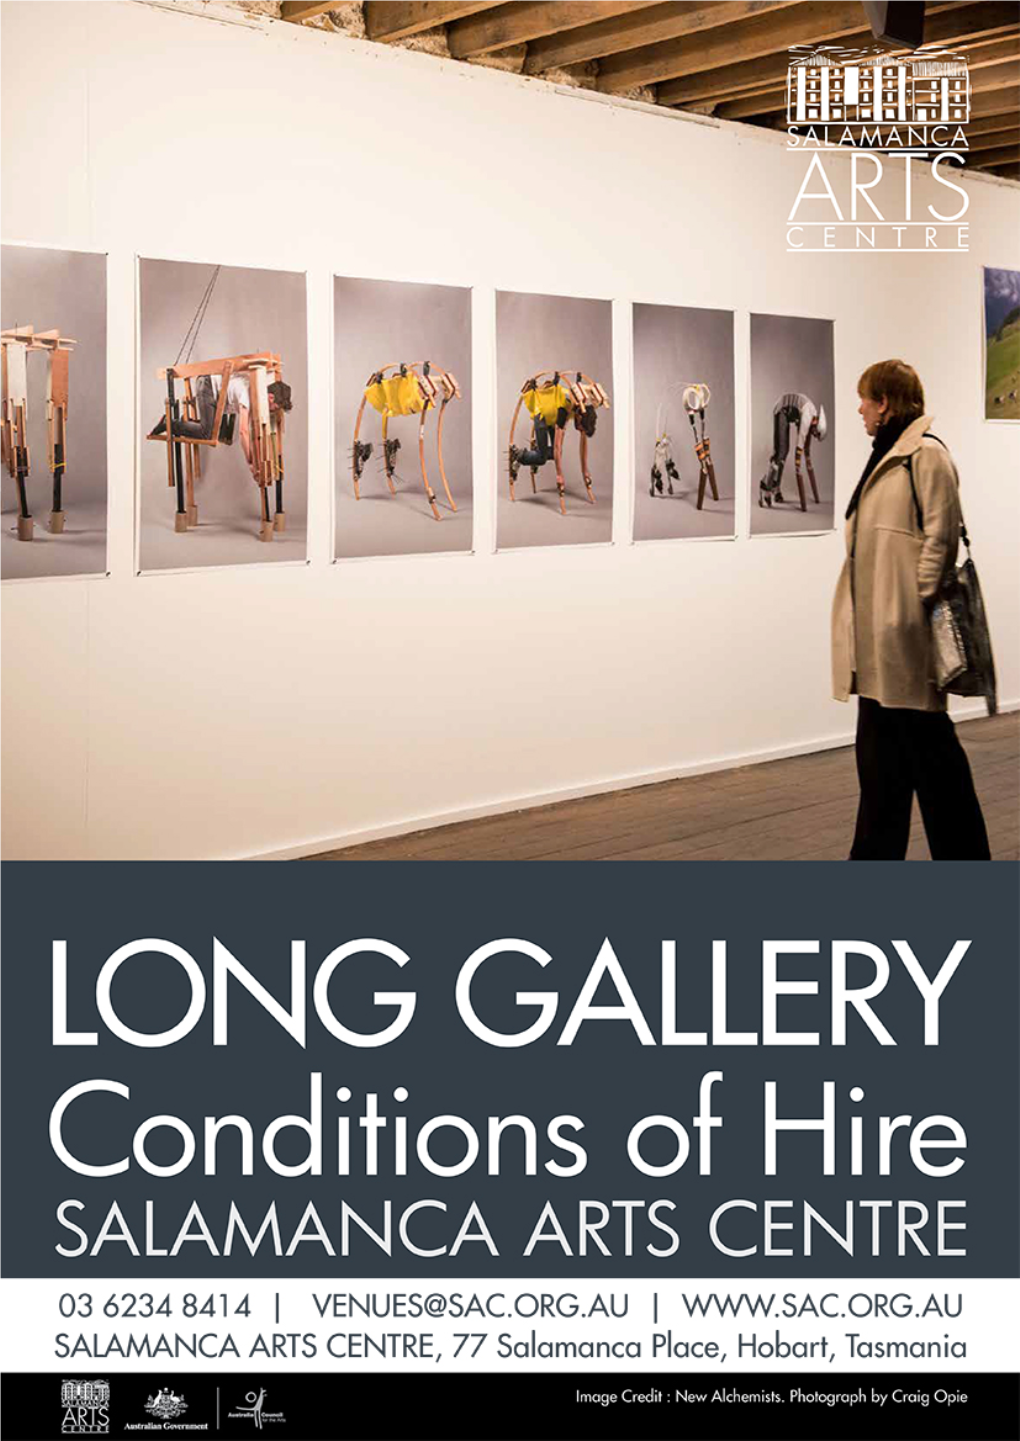 Long Gallery Conditions of Hire (PDF)